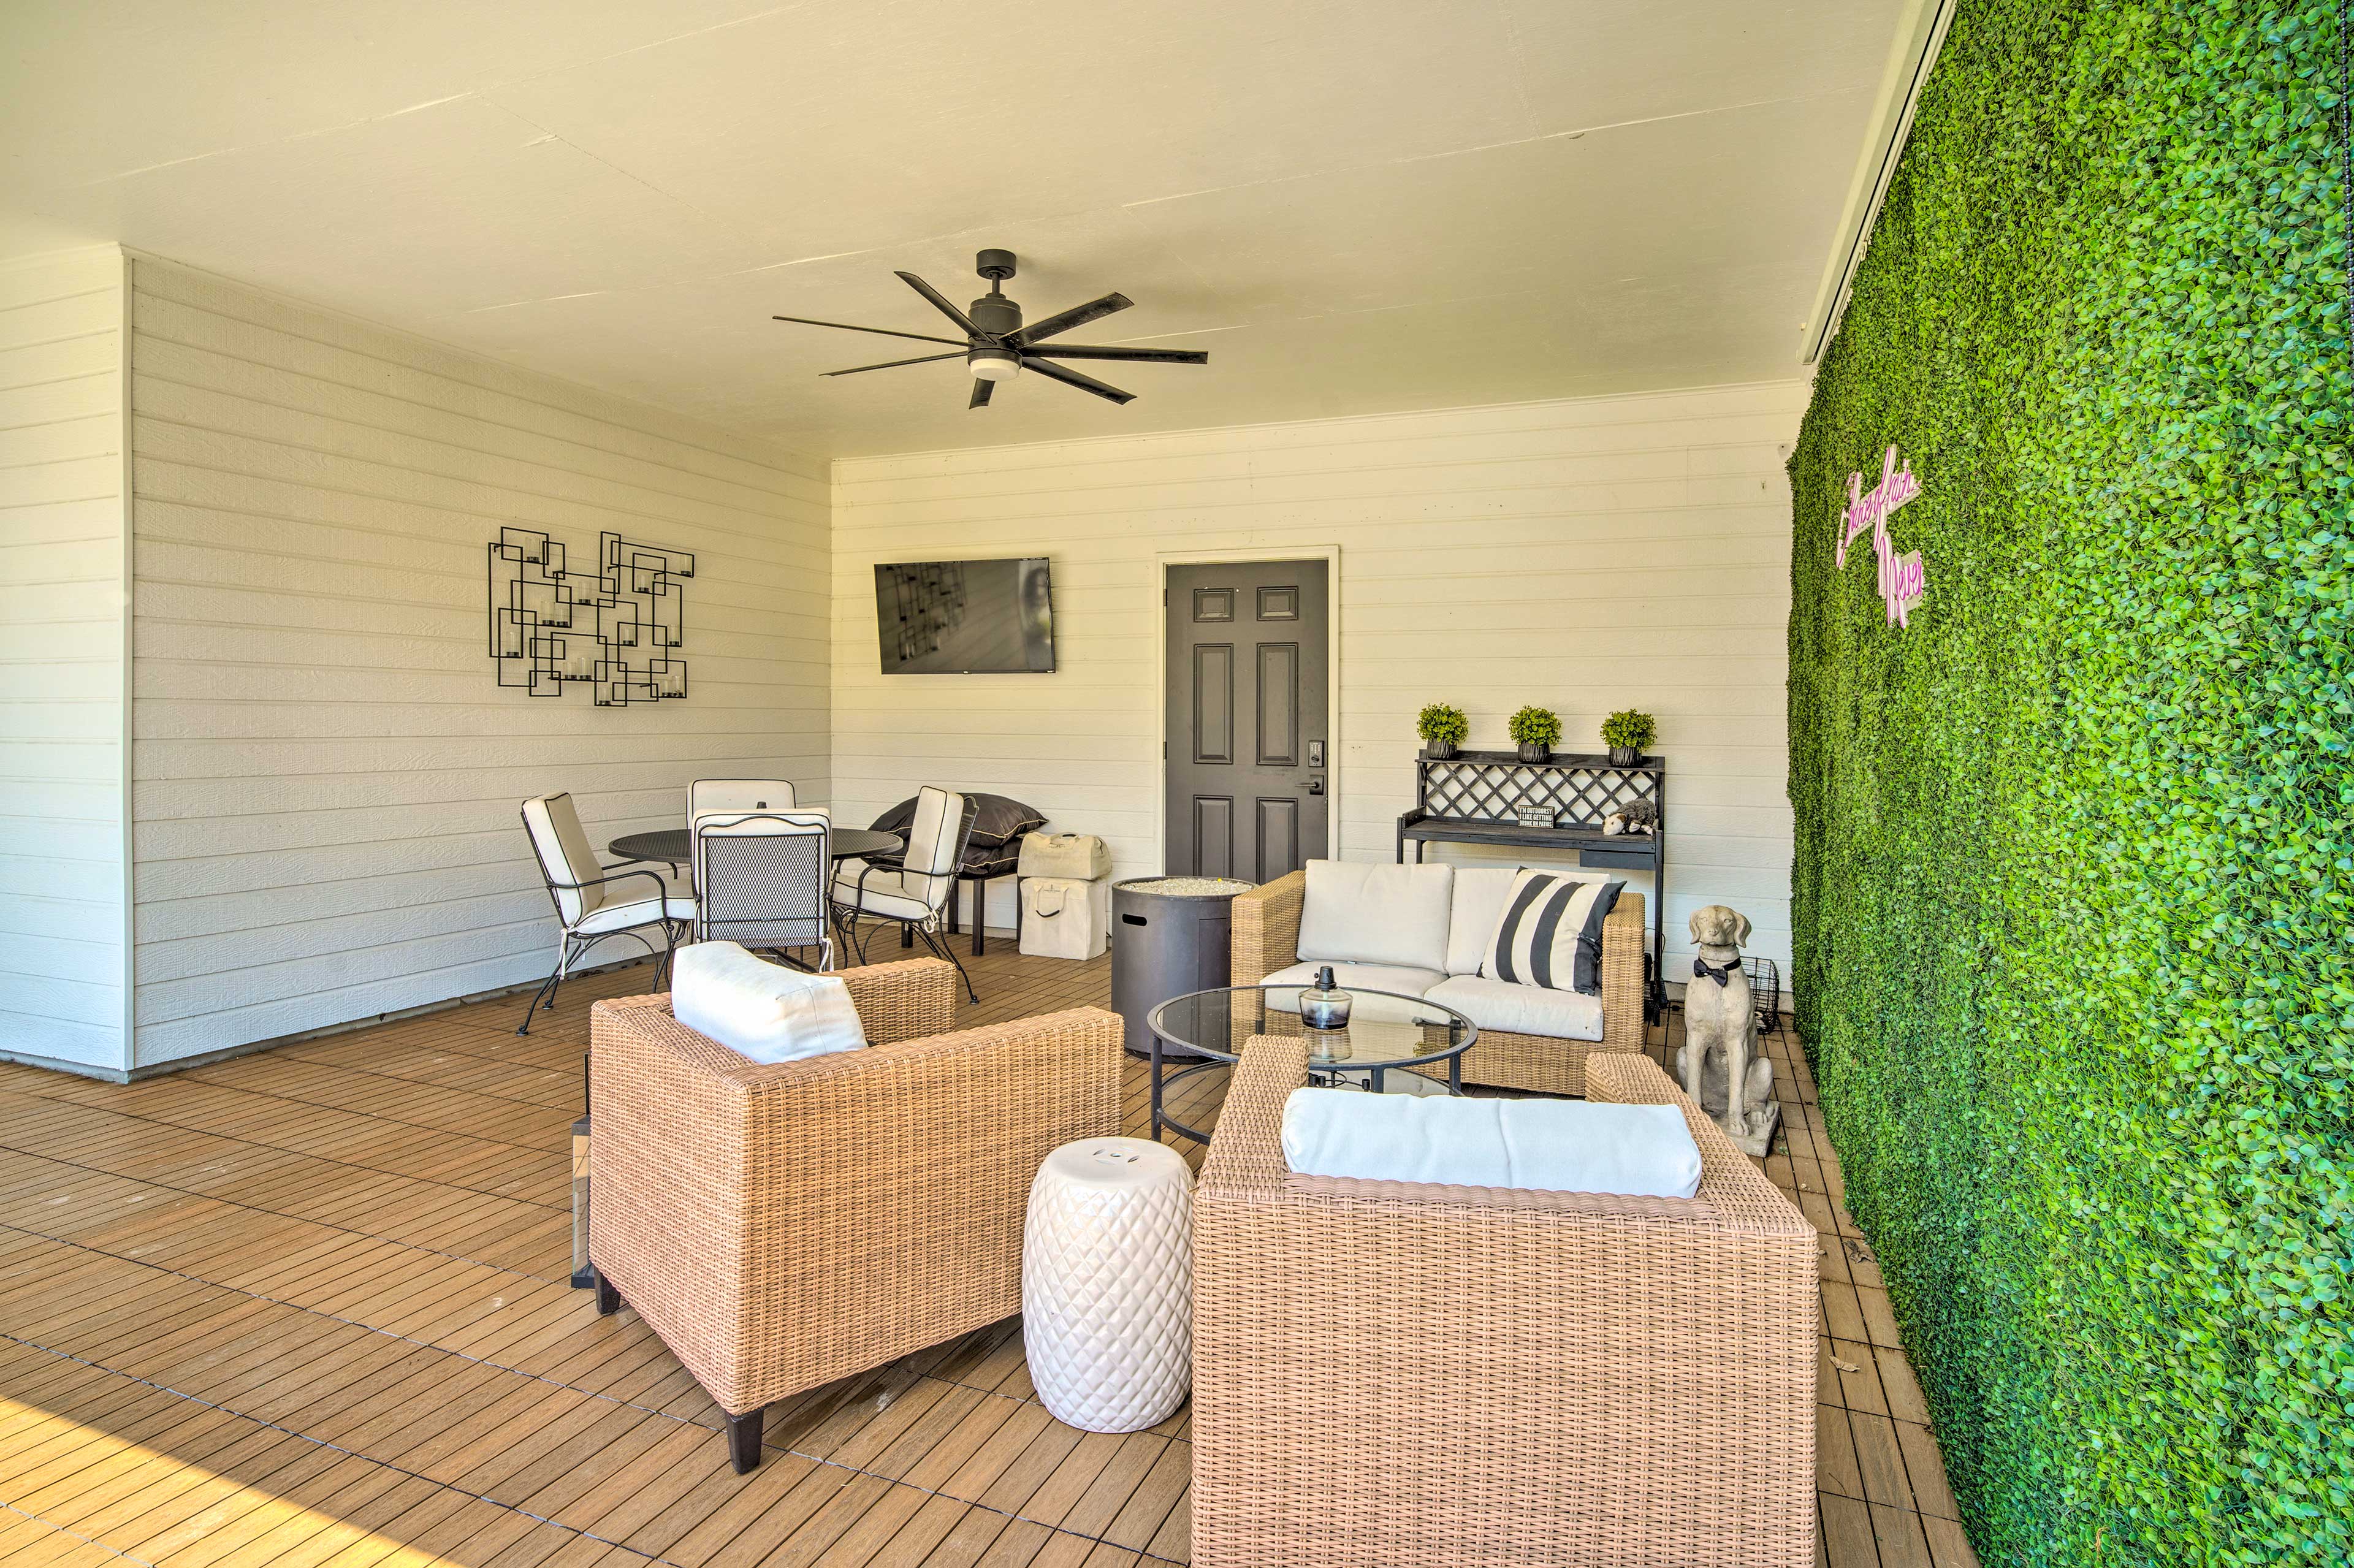 Patio | Dining Area | Smart TV | Gas Grill | Yard Games